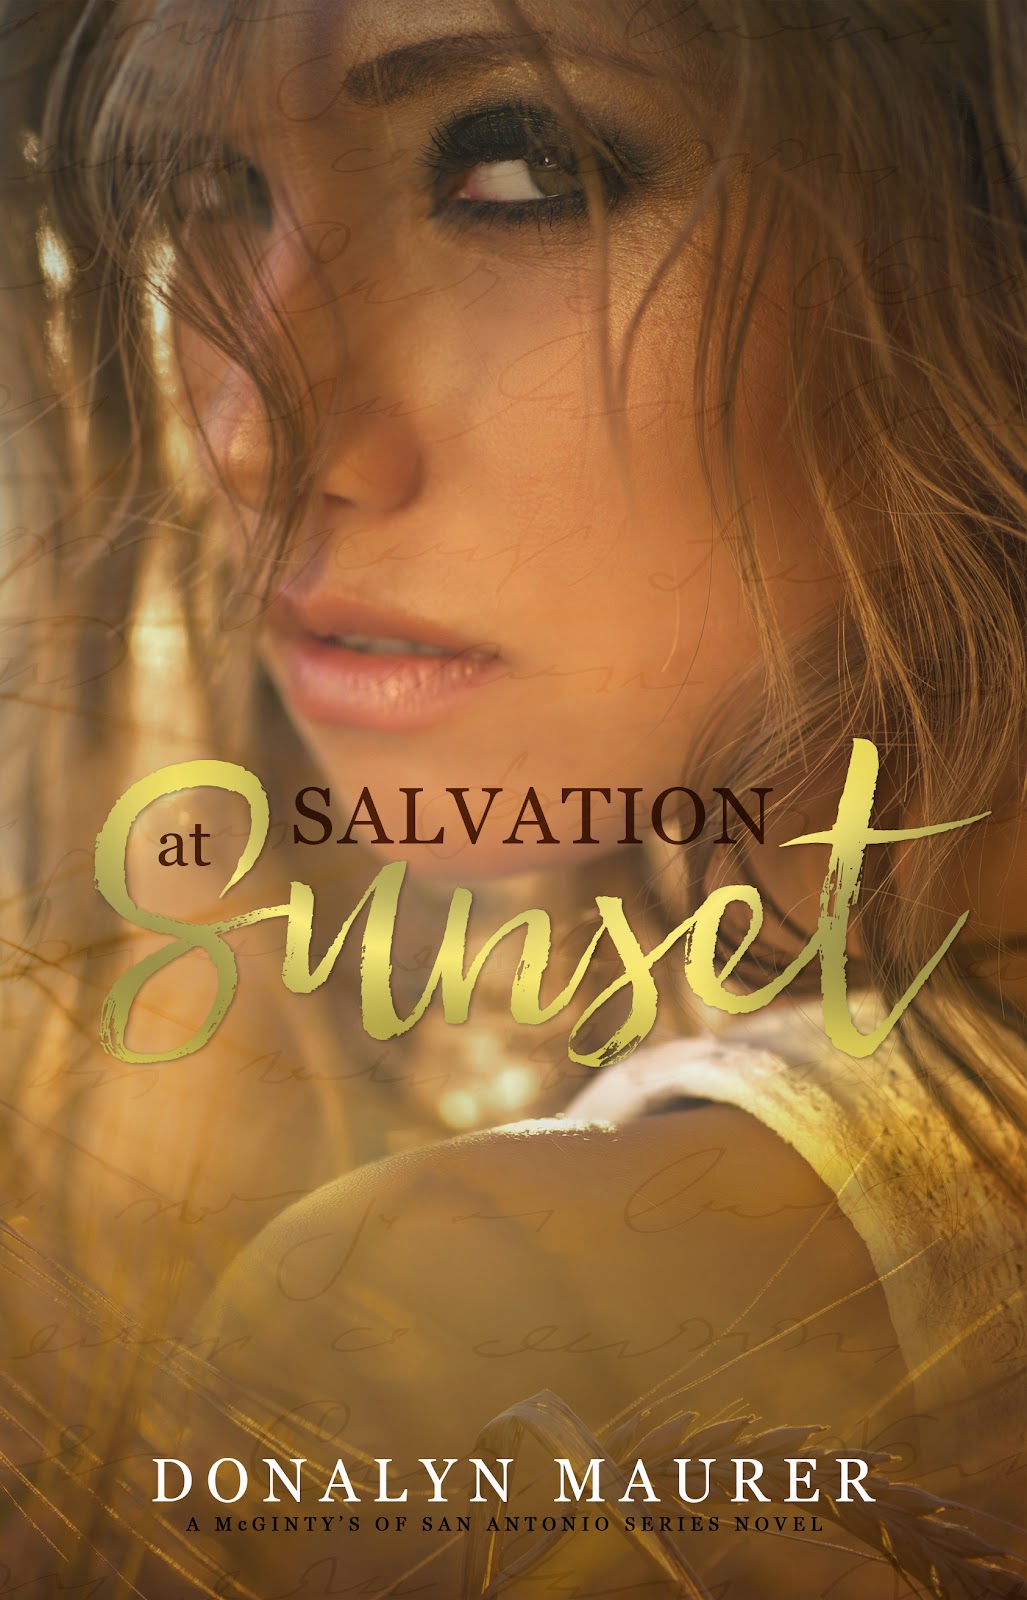 SALVATION AT SUNSET - EBOOK COVER.jpg